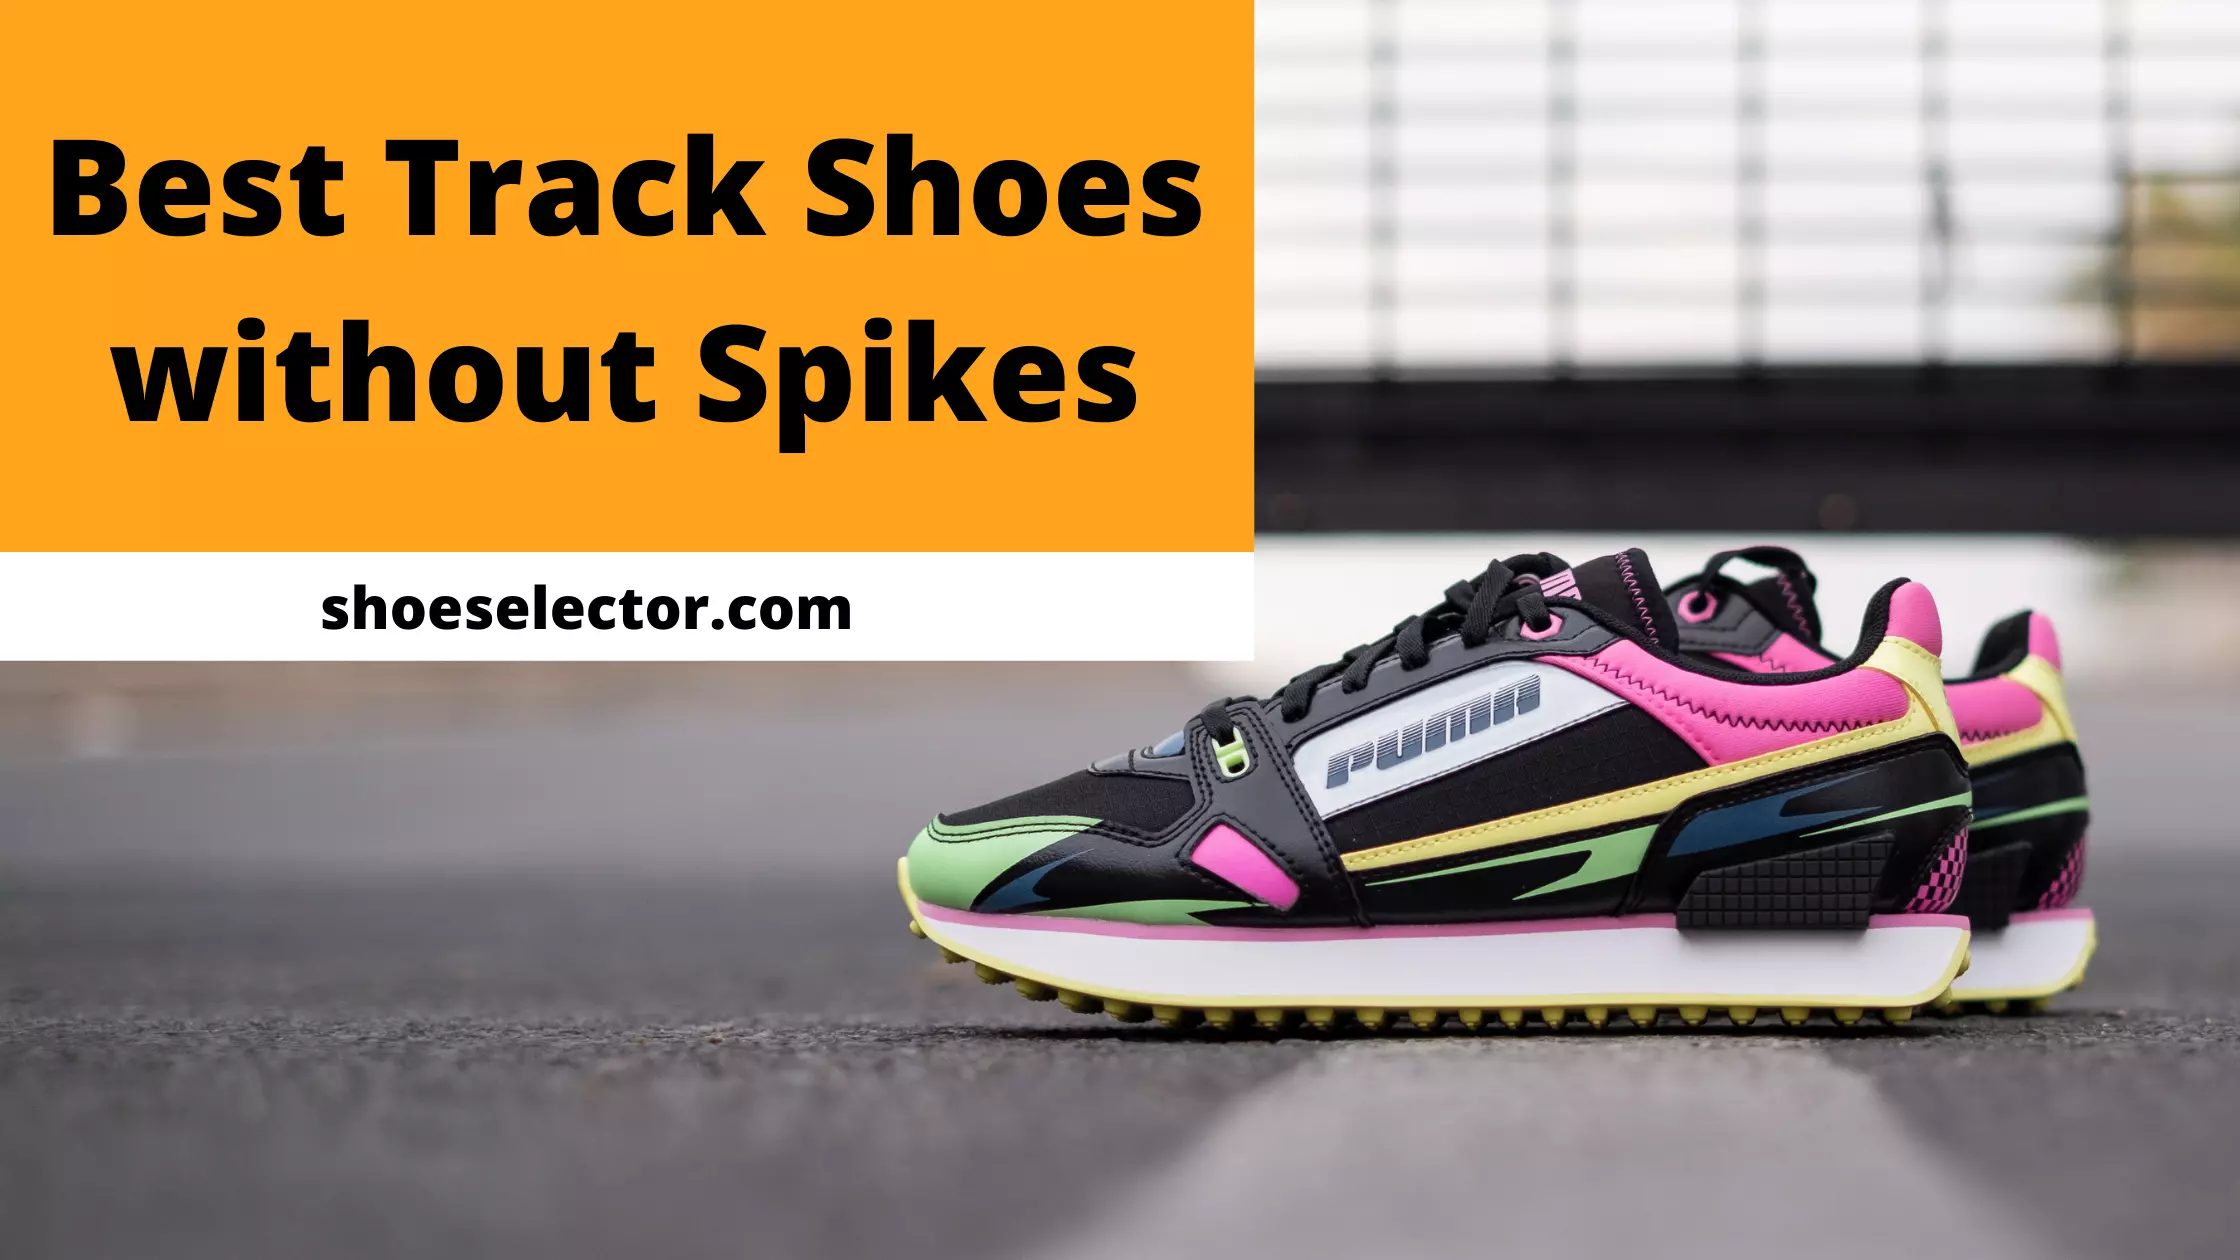 Best Track Shoes Without Spikes - Complete Guide